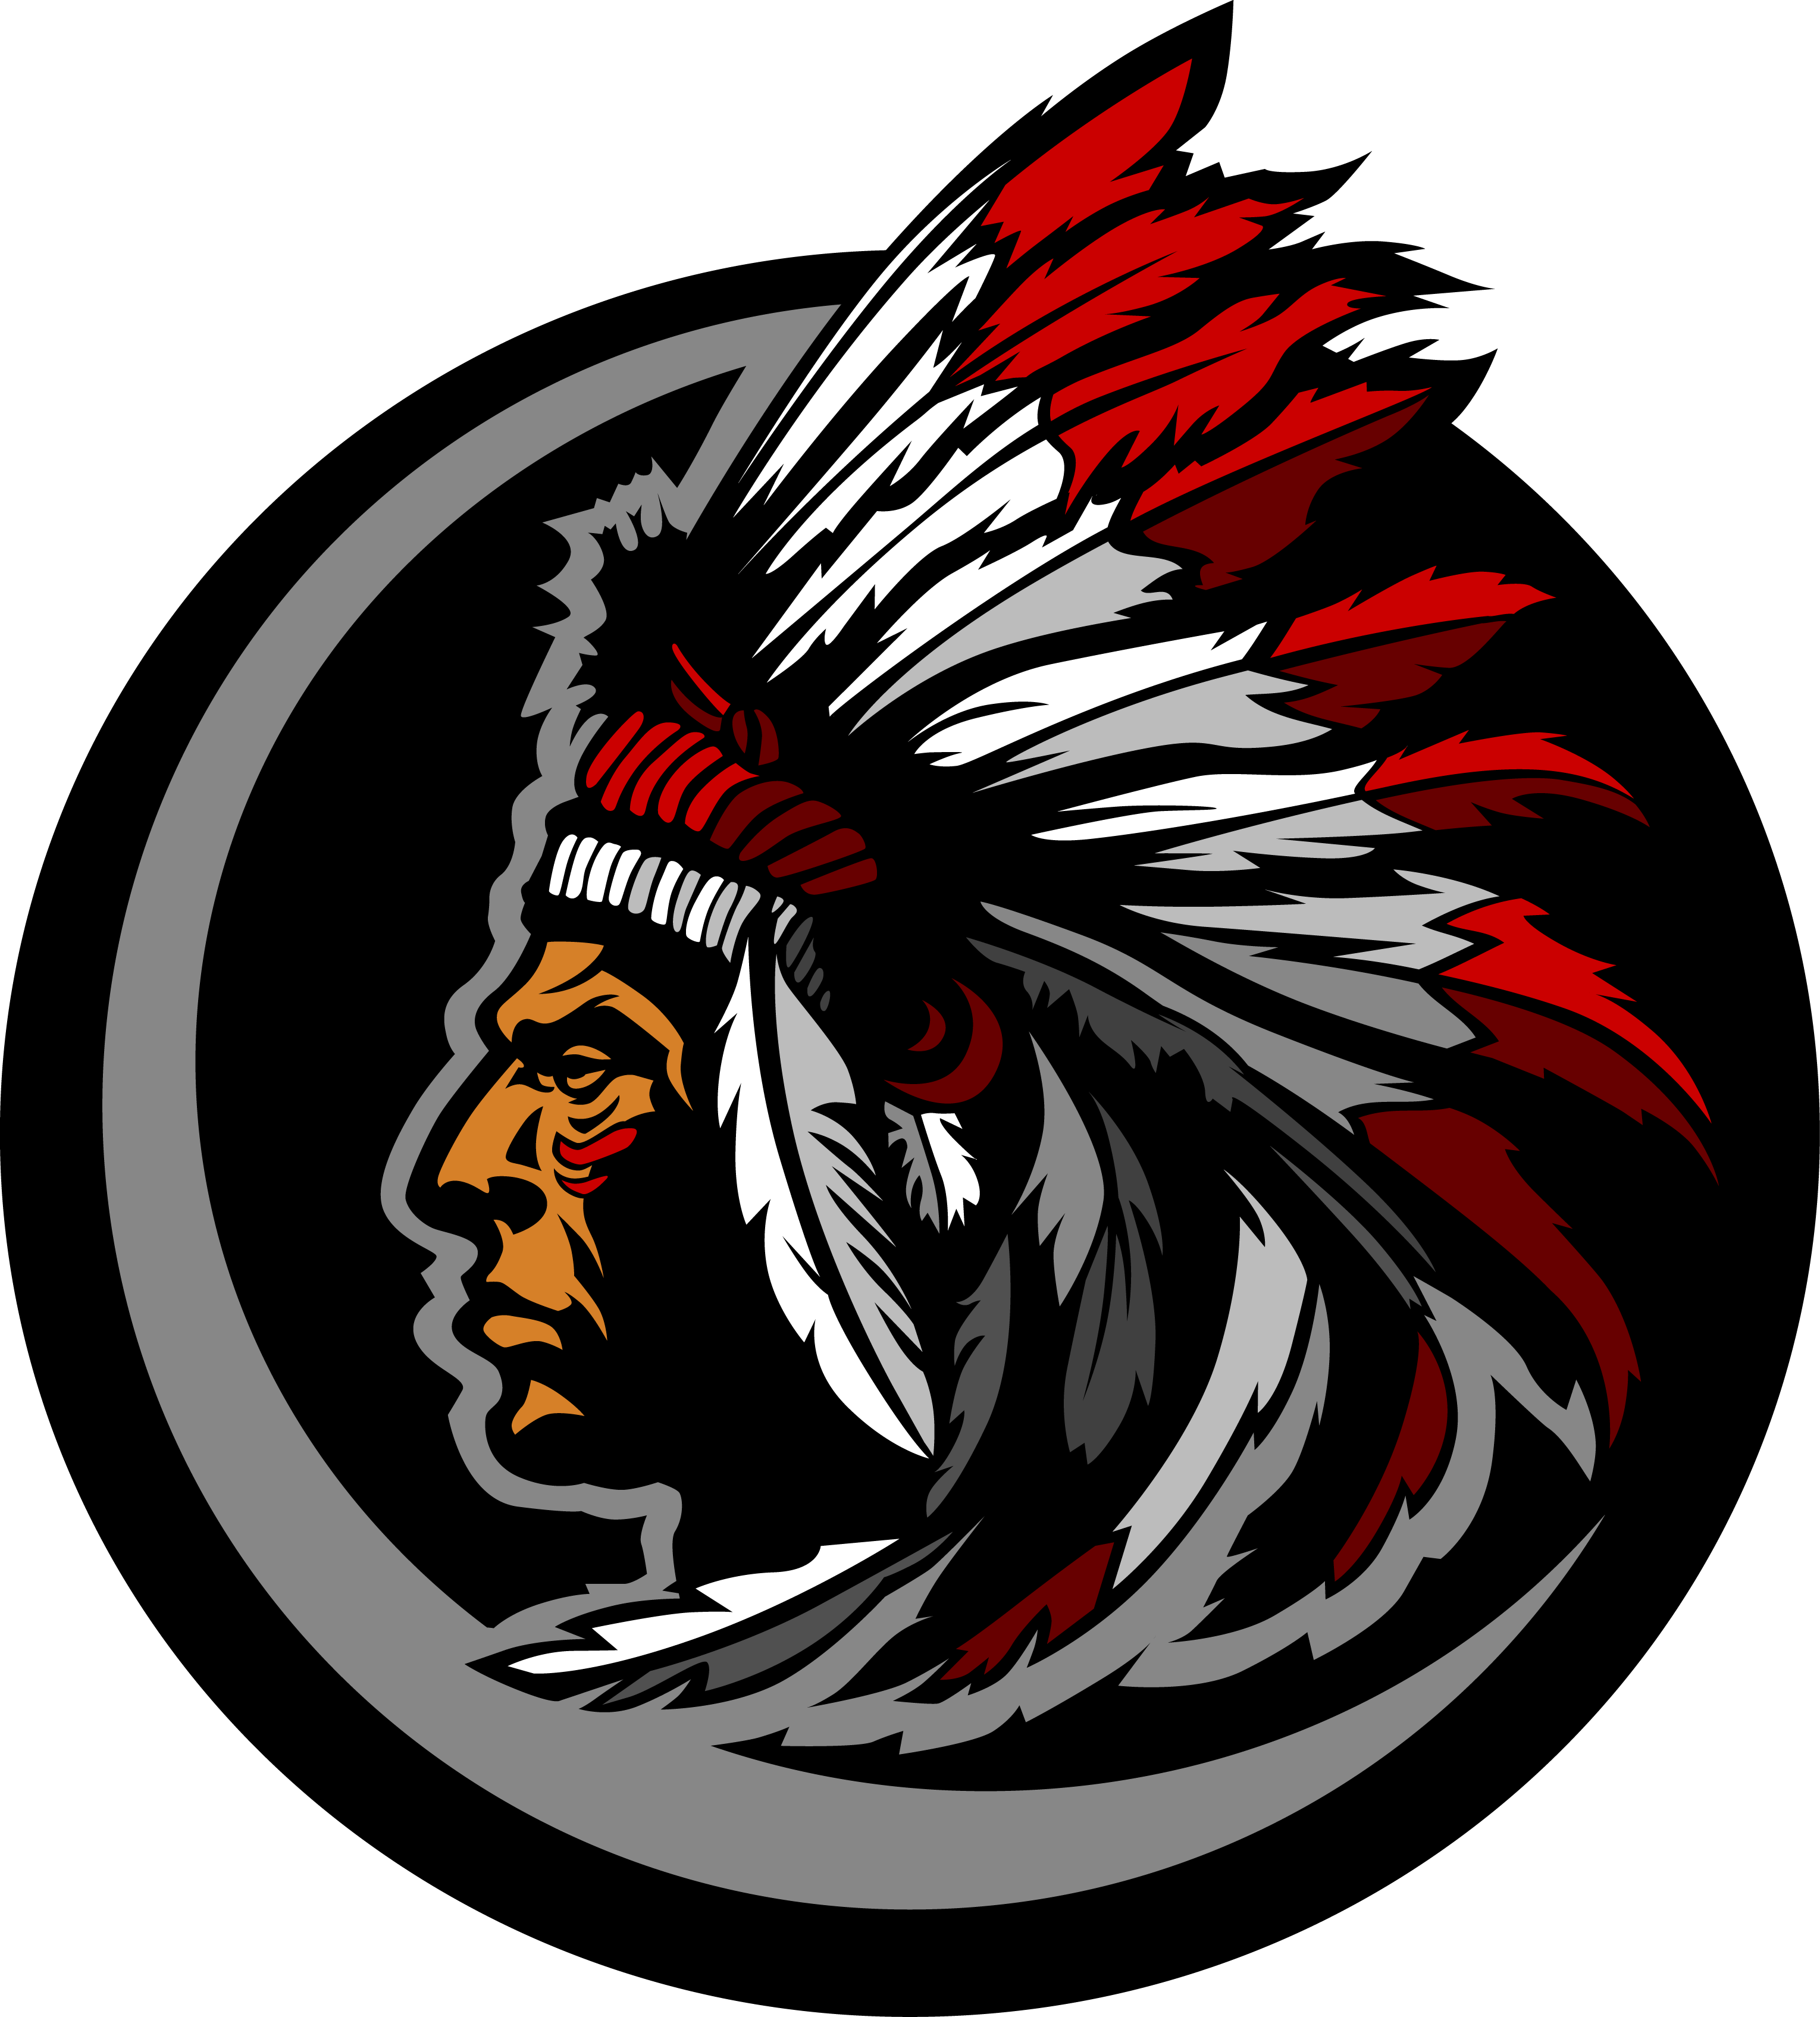 wyoming central school mascot of a native american chief 